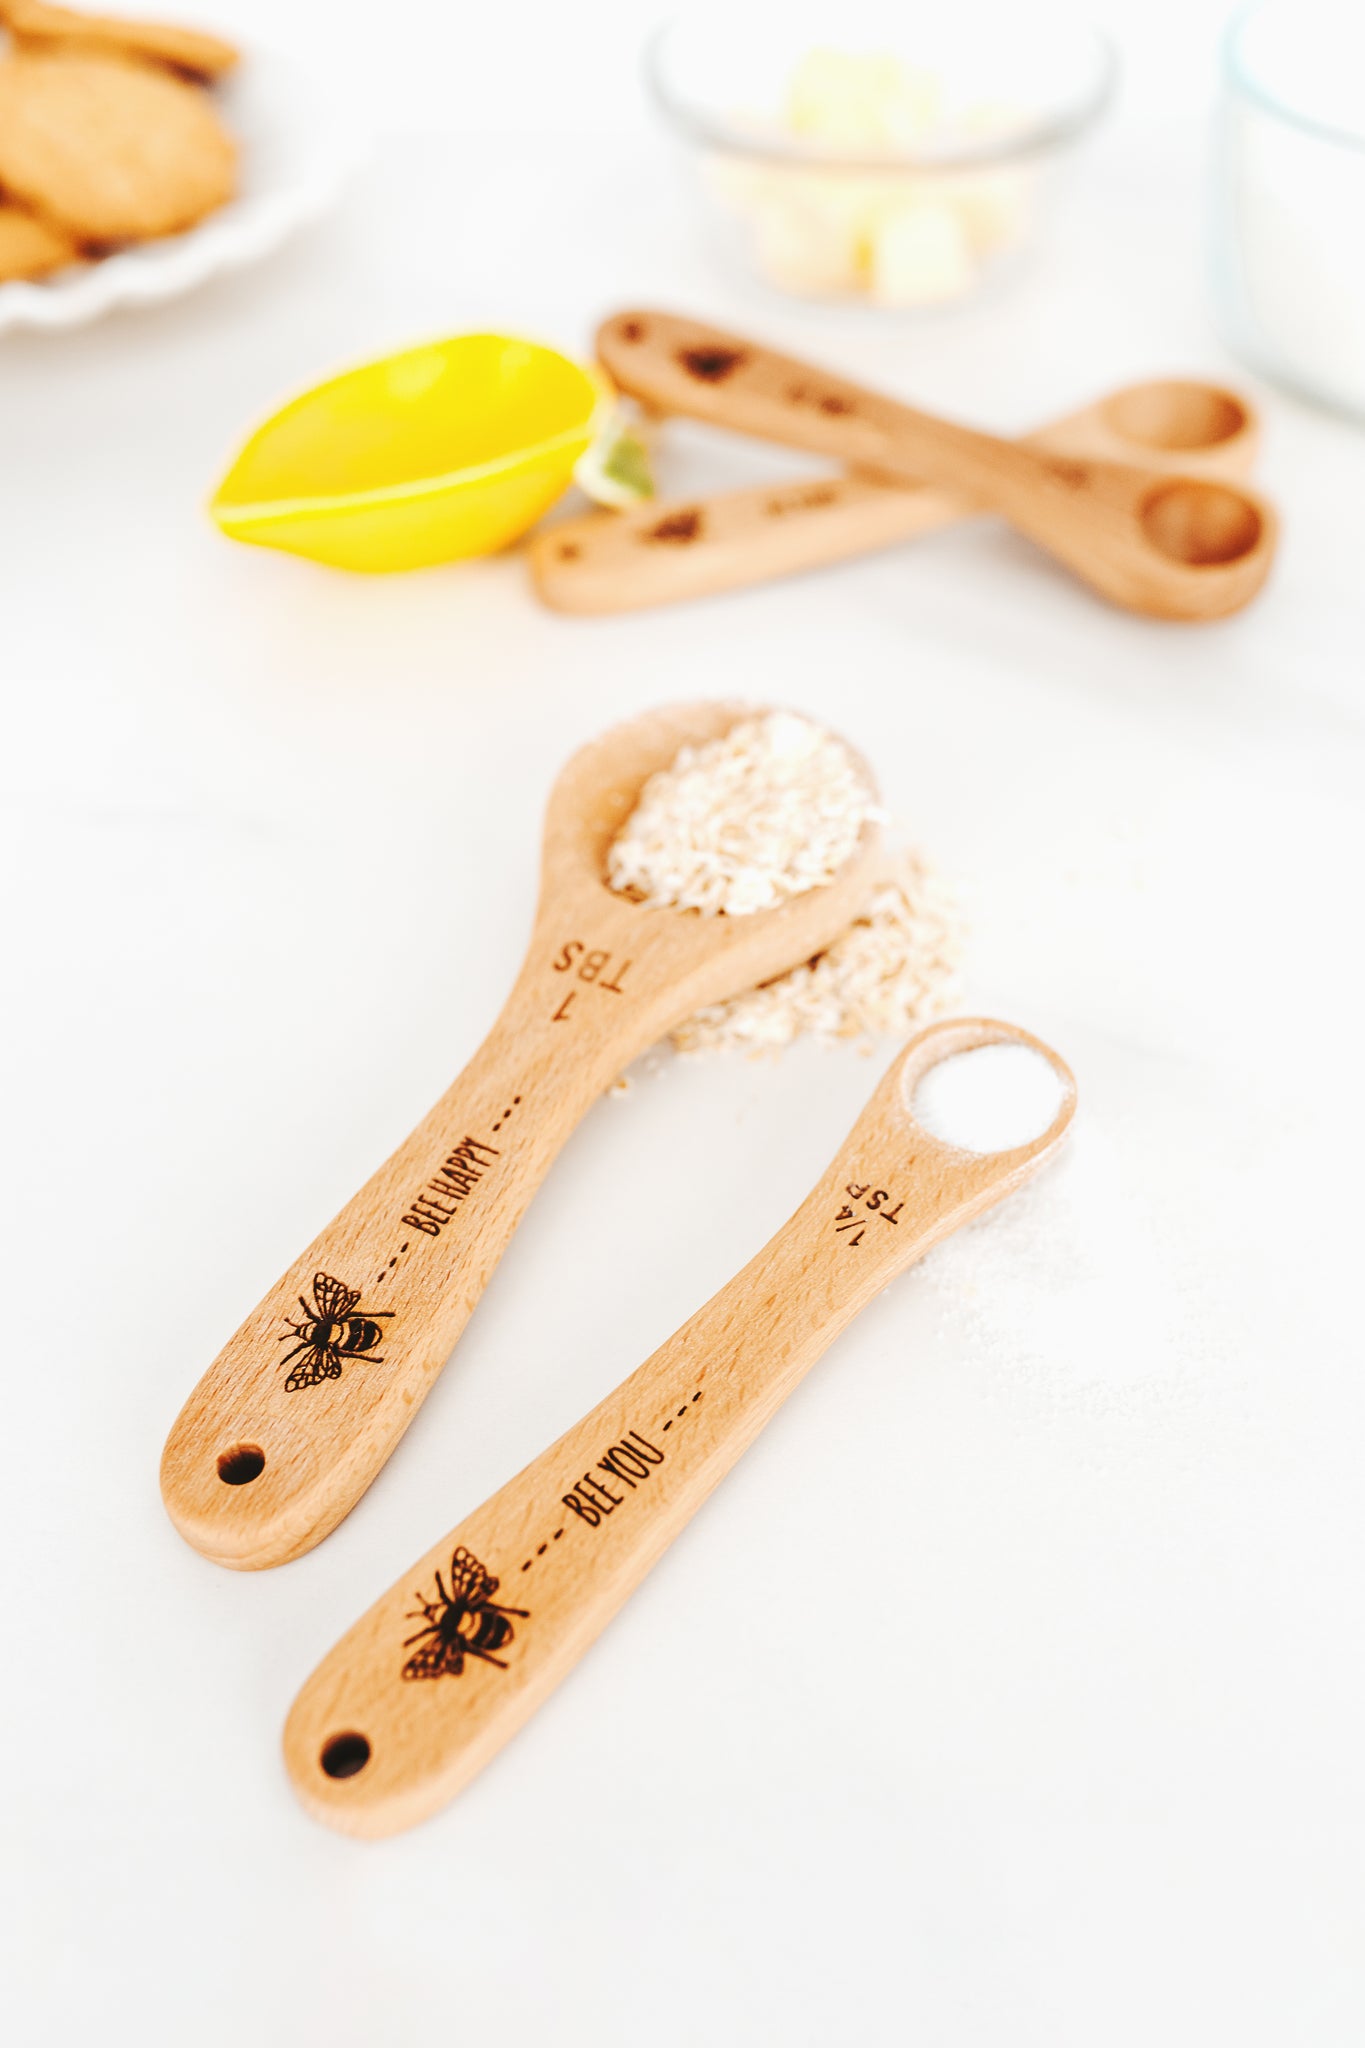 Wooden Measuring Cups, Measuring Spoons, Baking Gifts, Mom